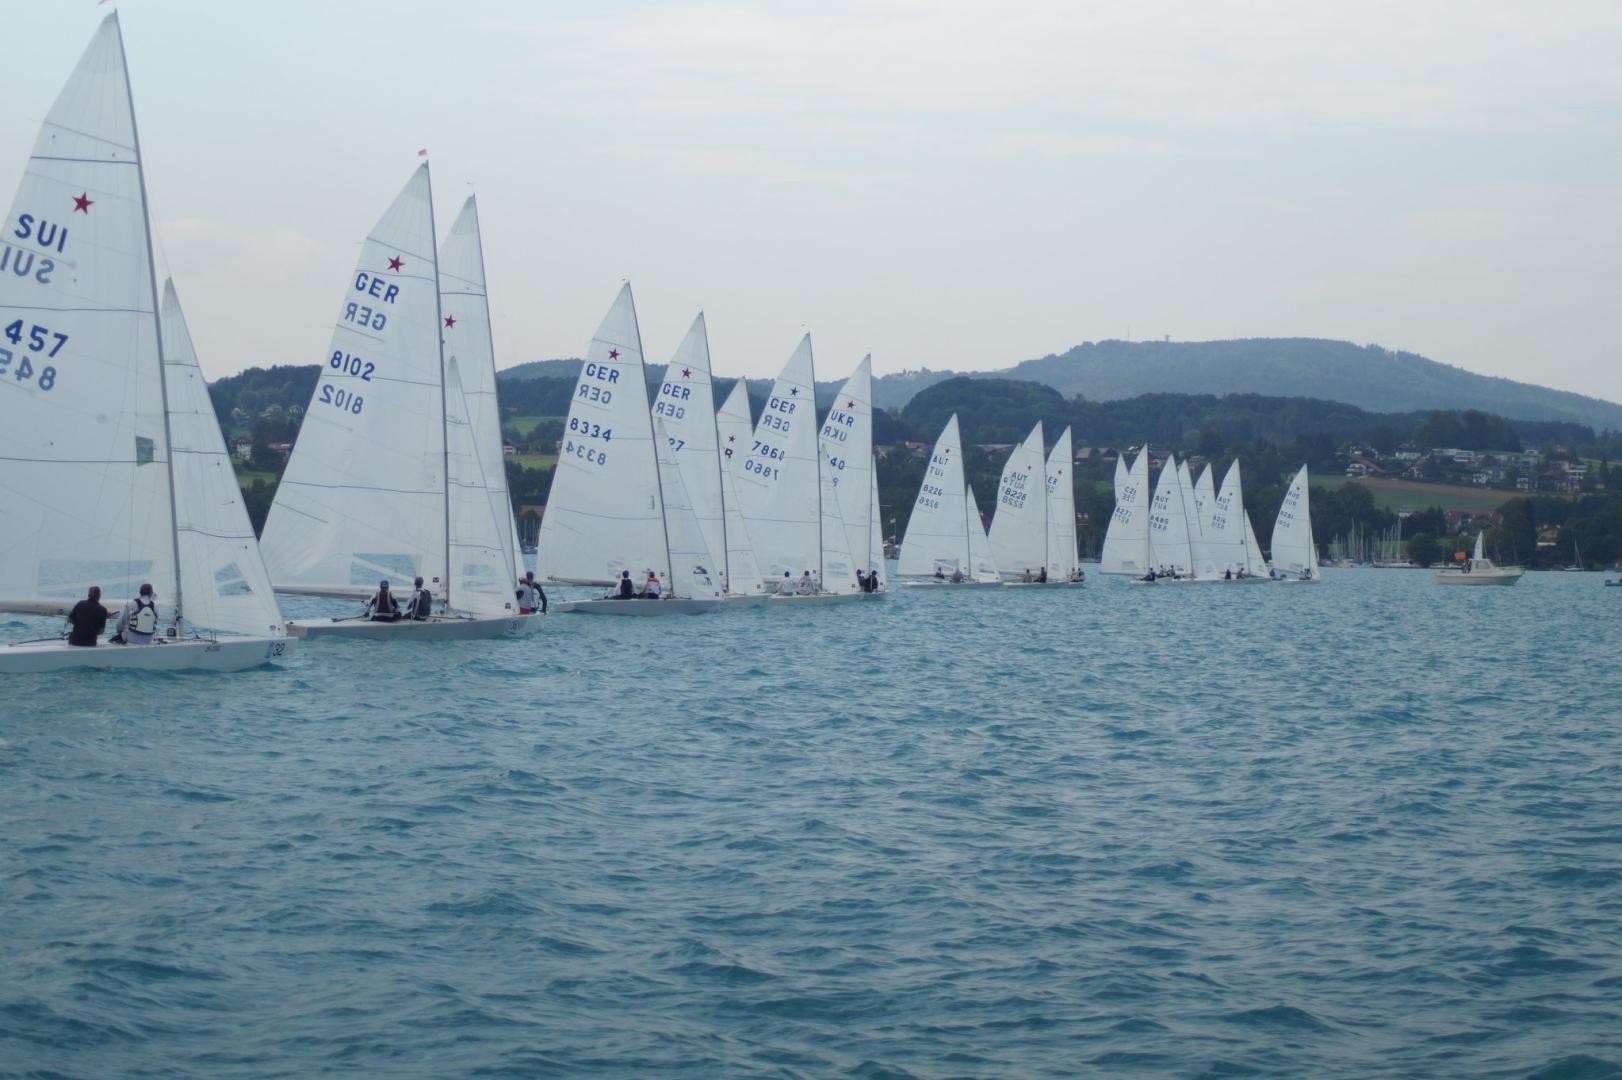 Diaz and Nehammer are the 2019 Star Eastern Hemisphere Champions